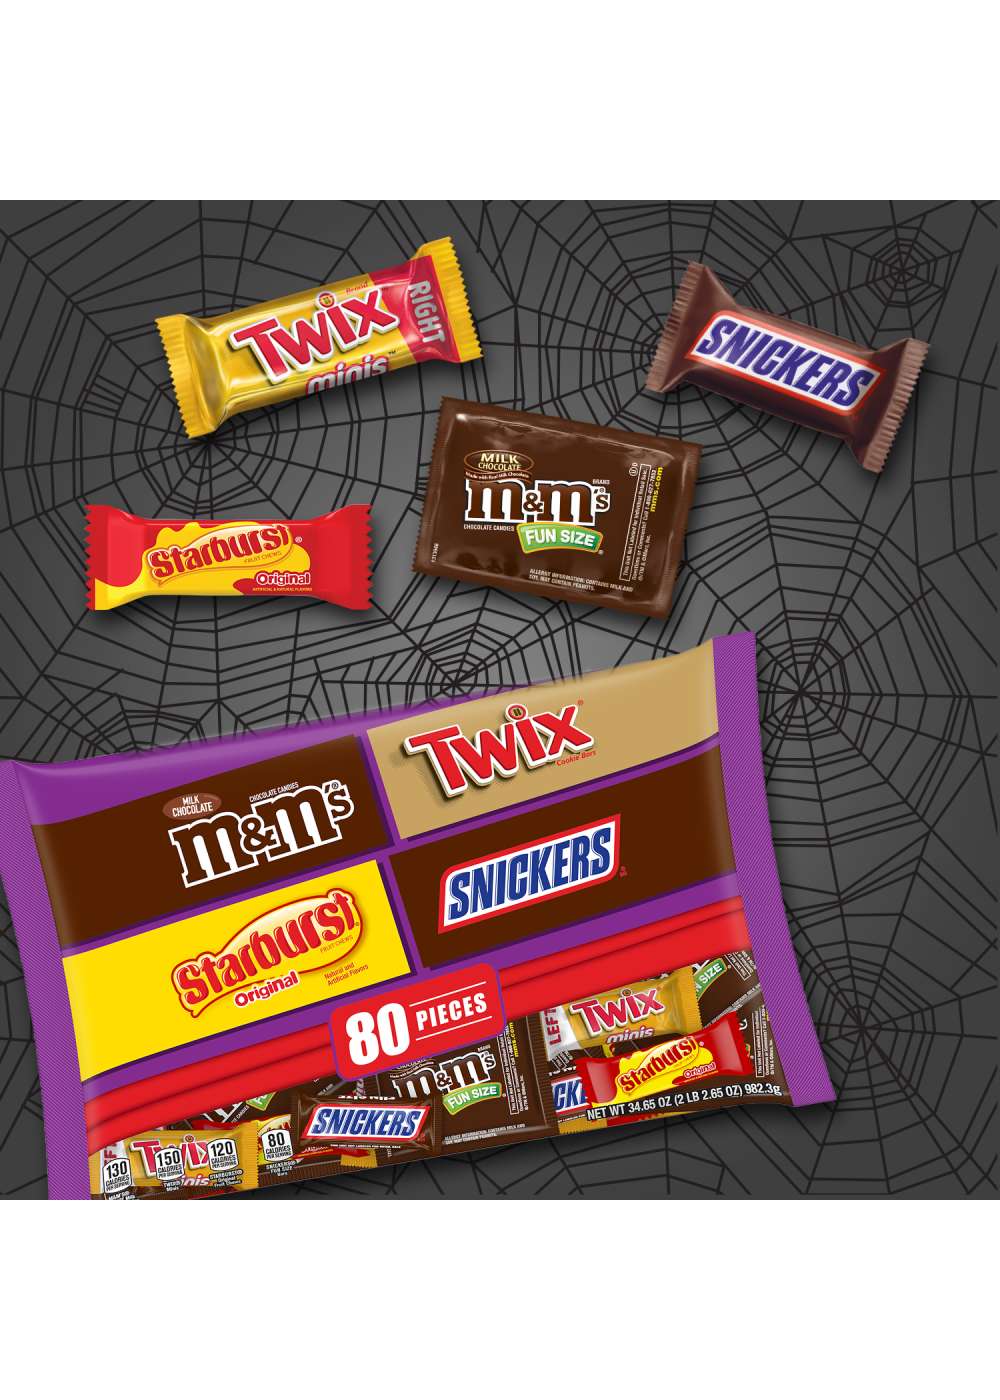 Mars Skittles Starburst Snickers Twix And M&ms Halloween Candy